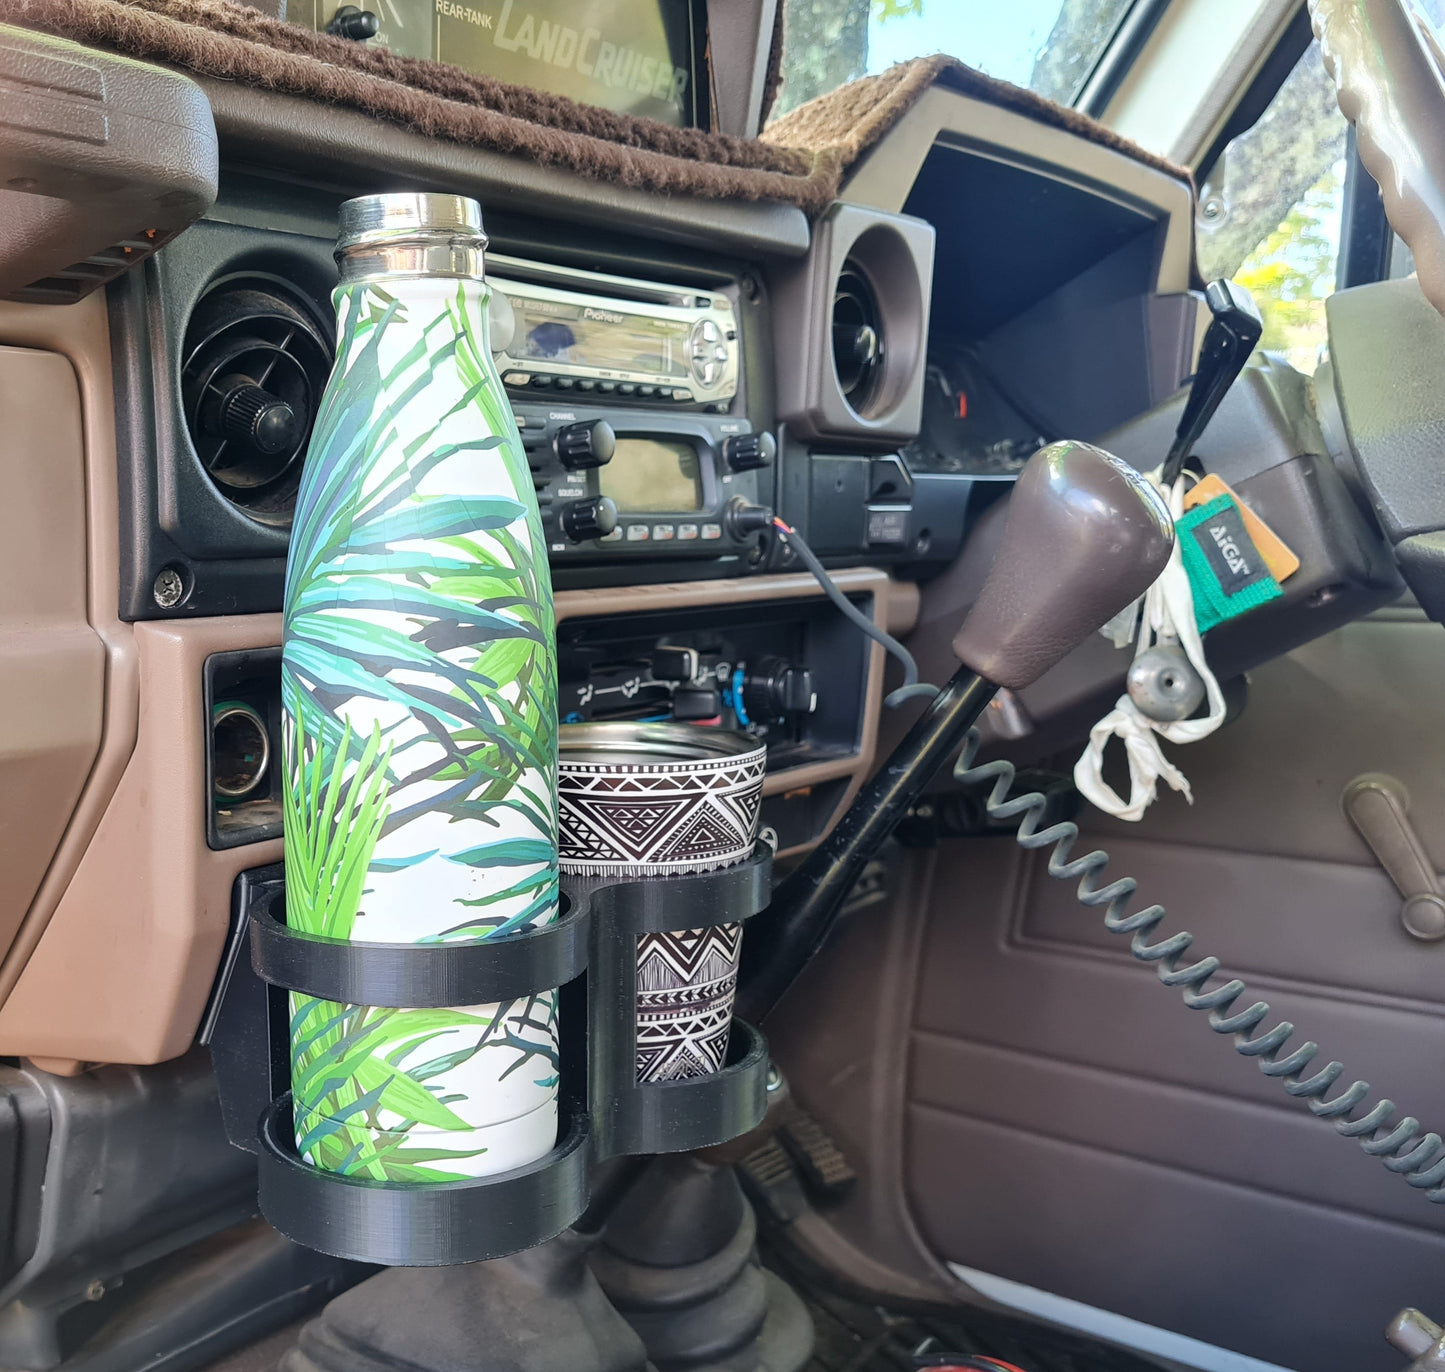 75 to 79 Series Landcruiser Dual Cup\Mic Holder with Tray